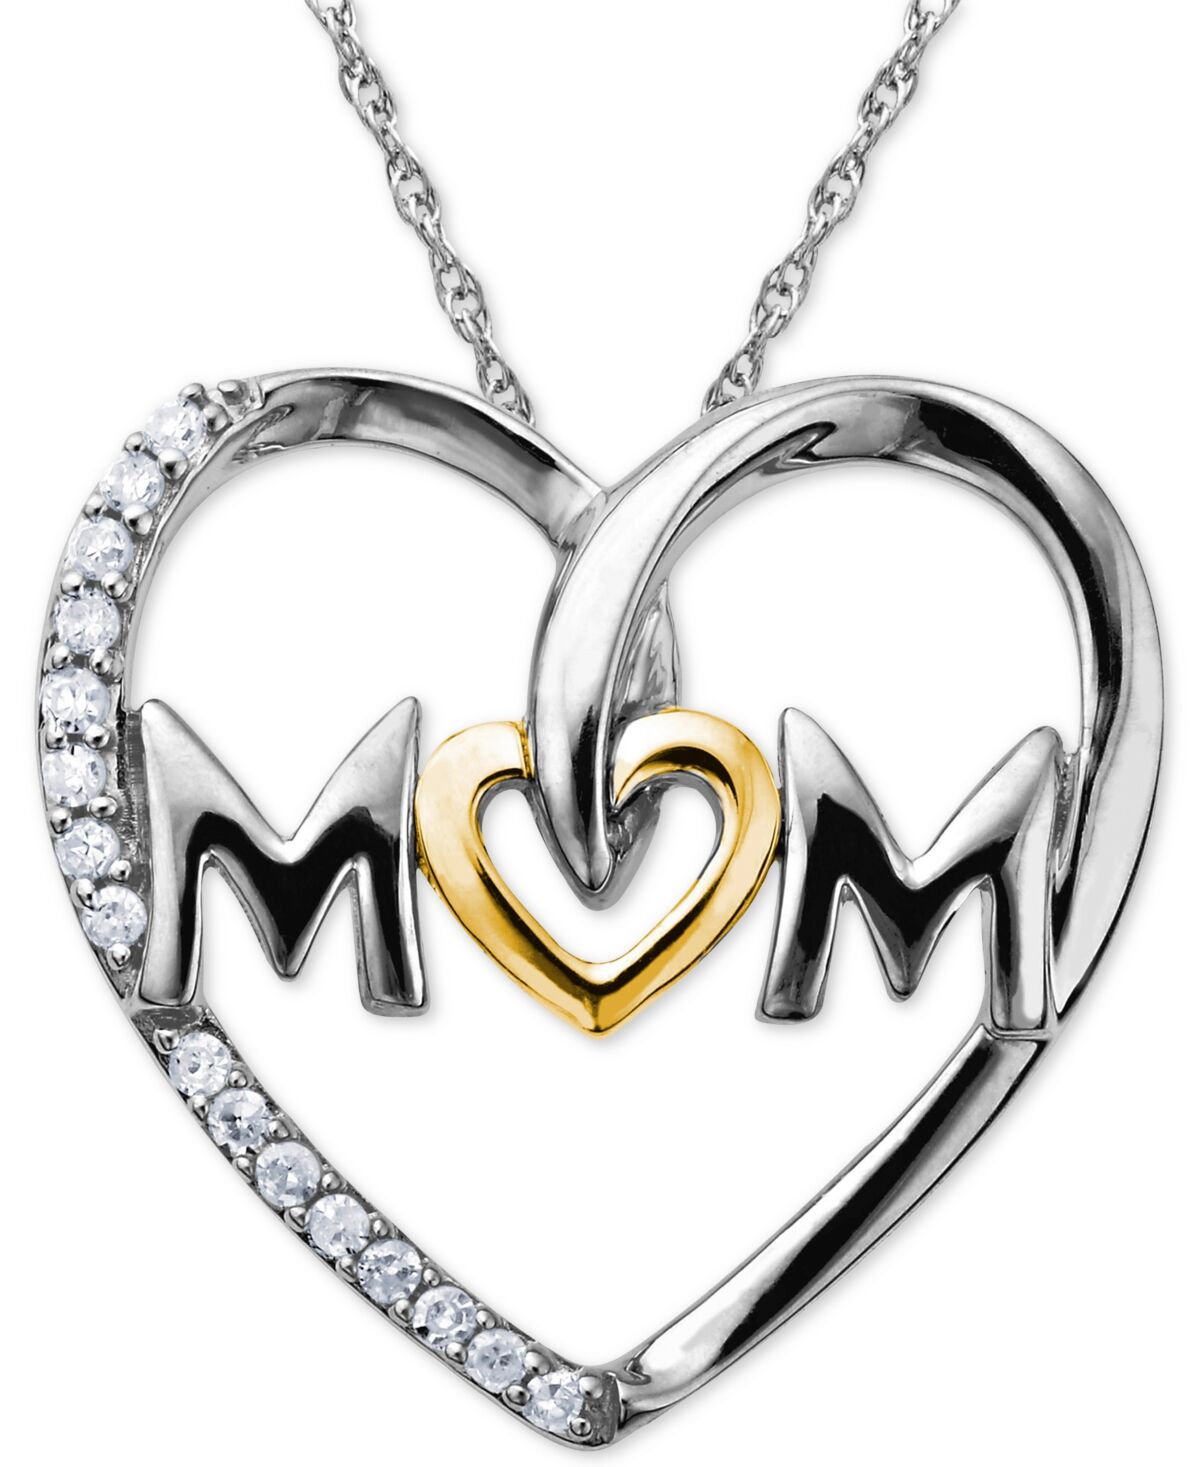 Macy's Mom Diamond Heart Necklace in Sterling Silver and 14k Gold (1/10 ct. t.w.) - Silver/Gold